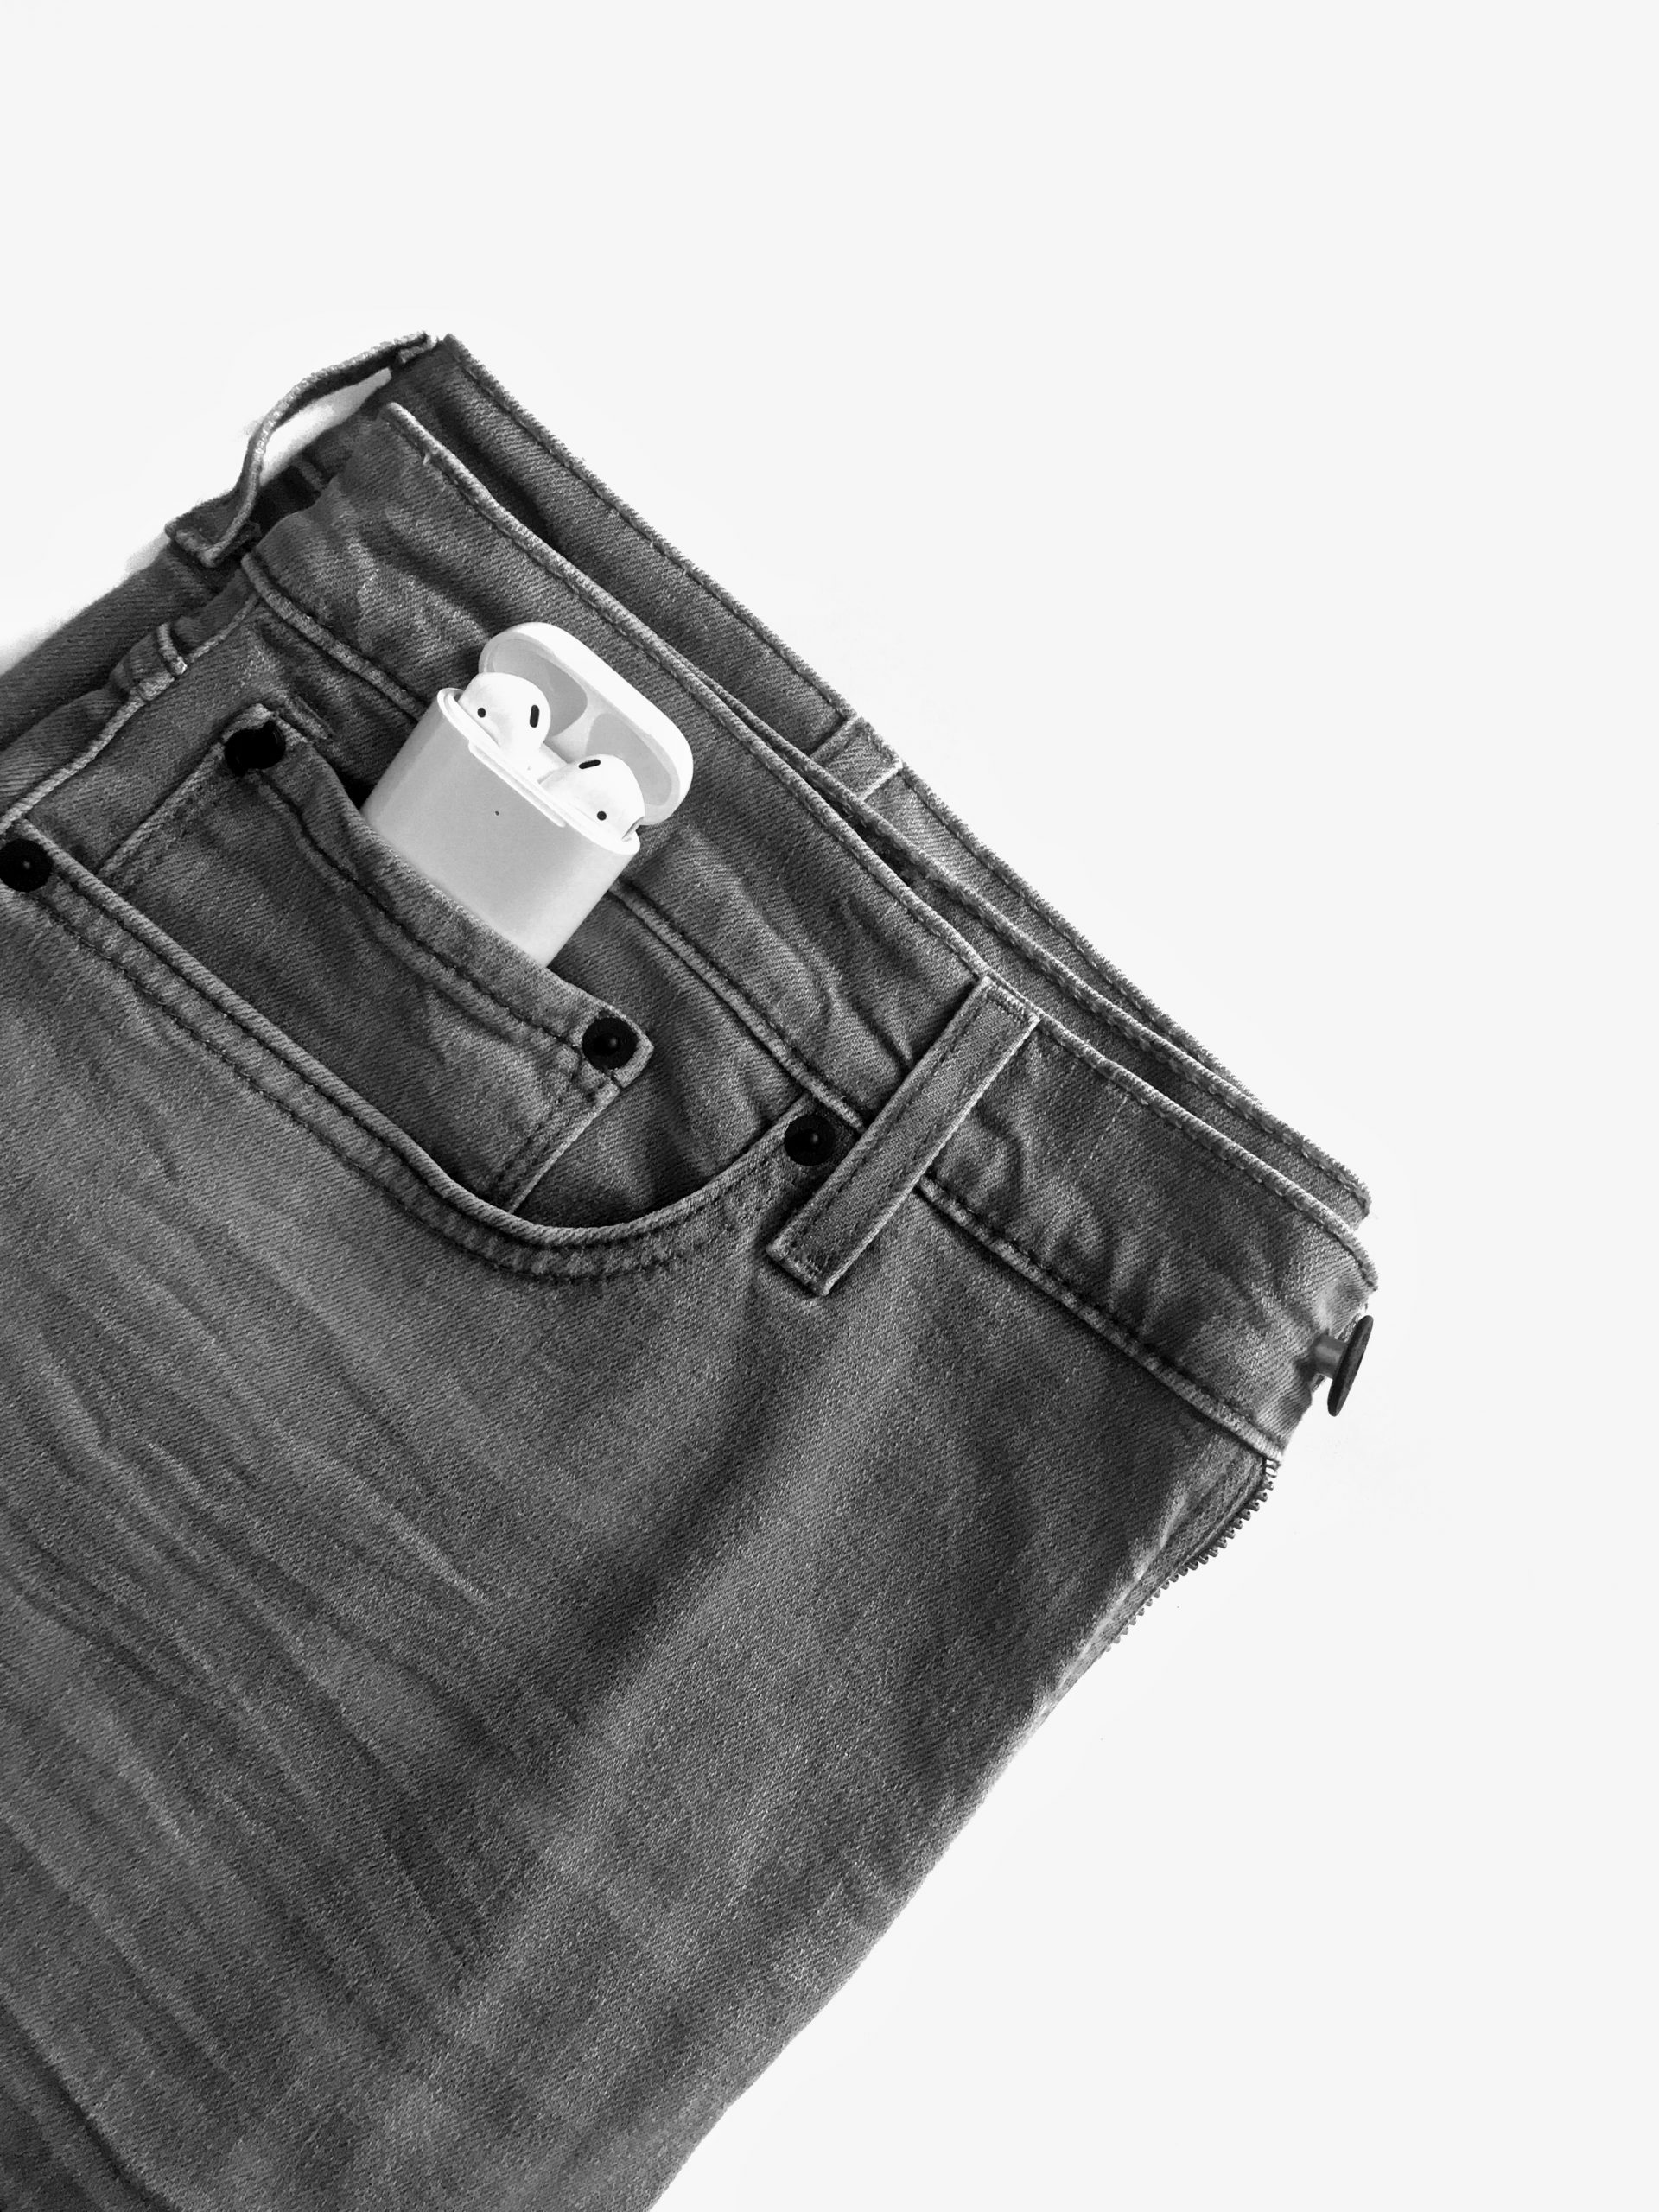 airpods in jeans pocket